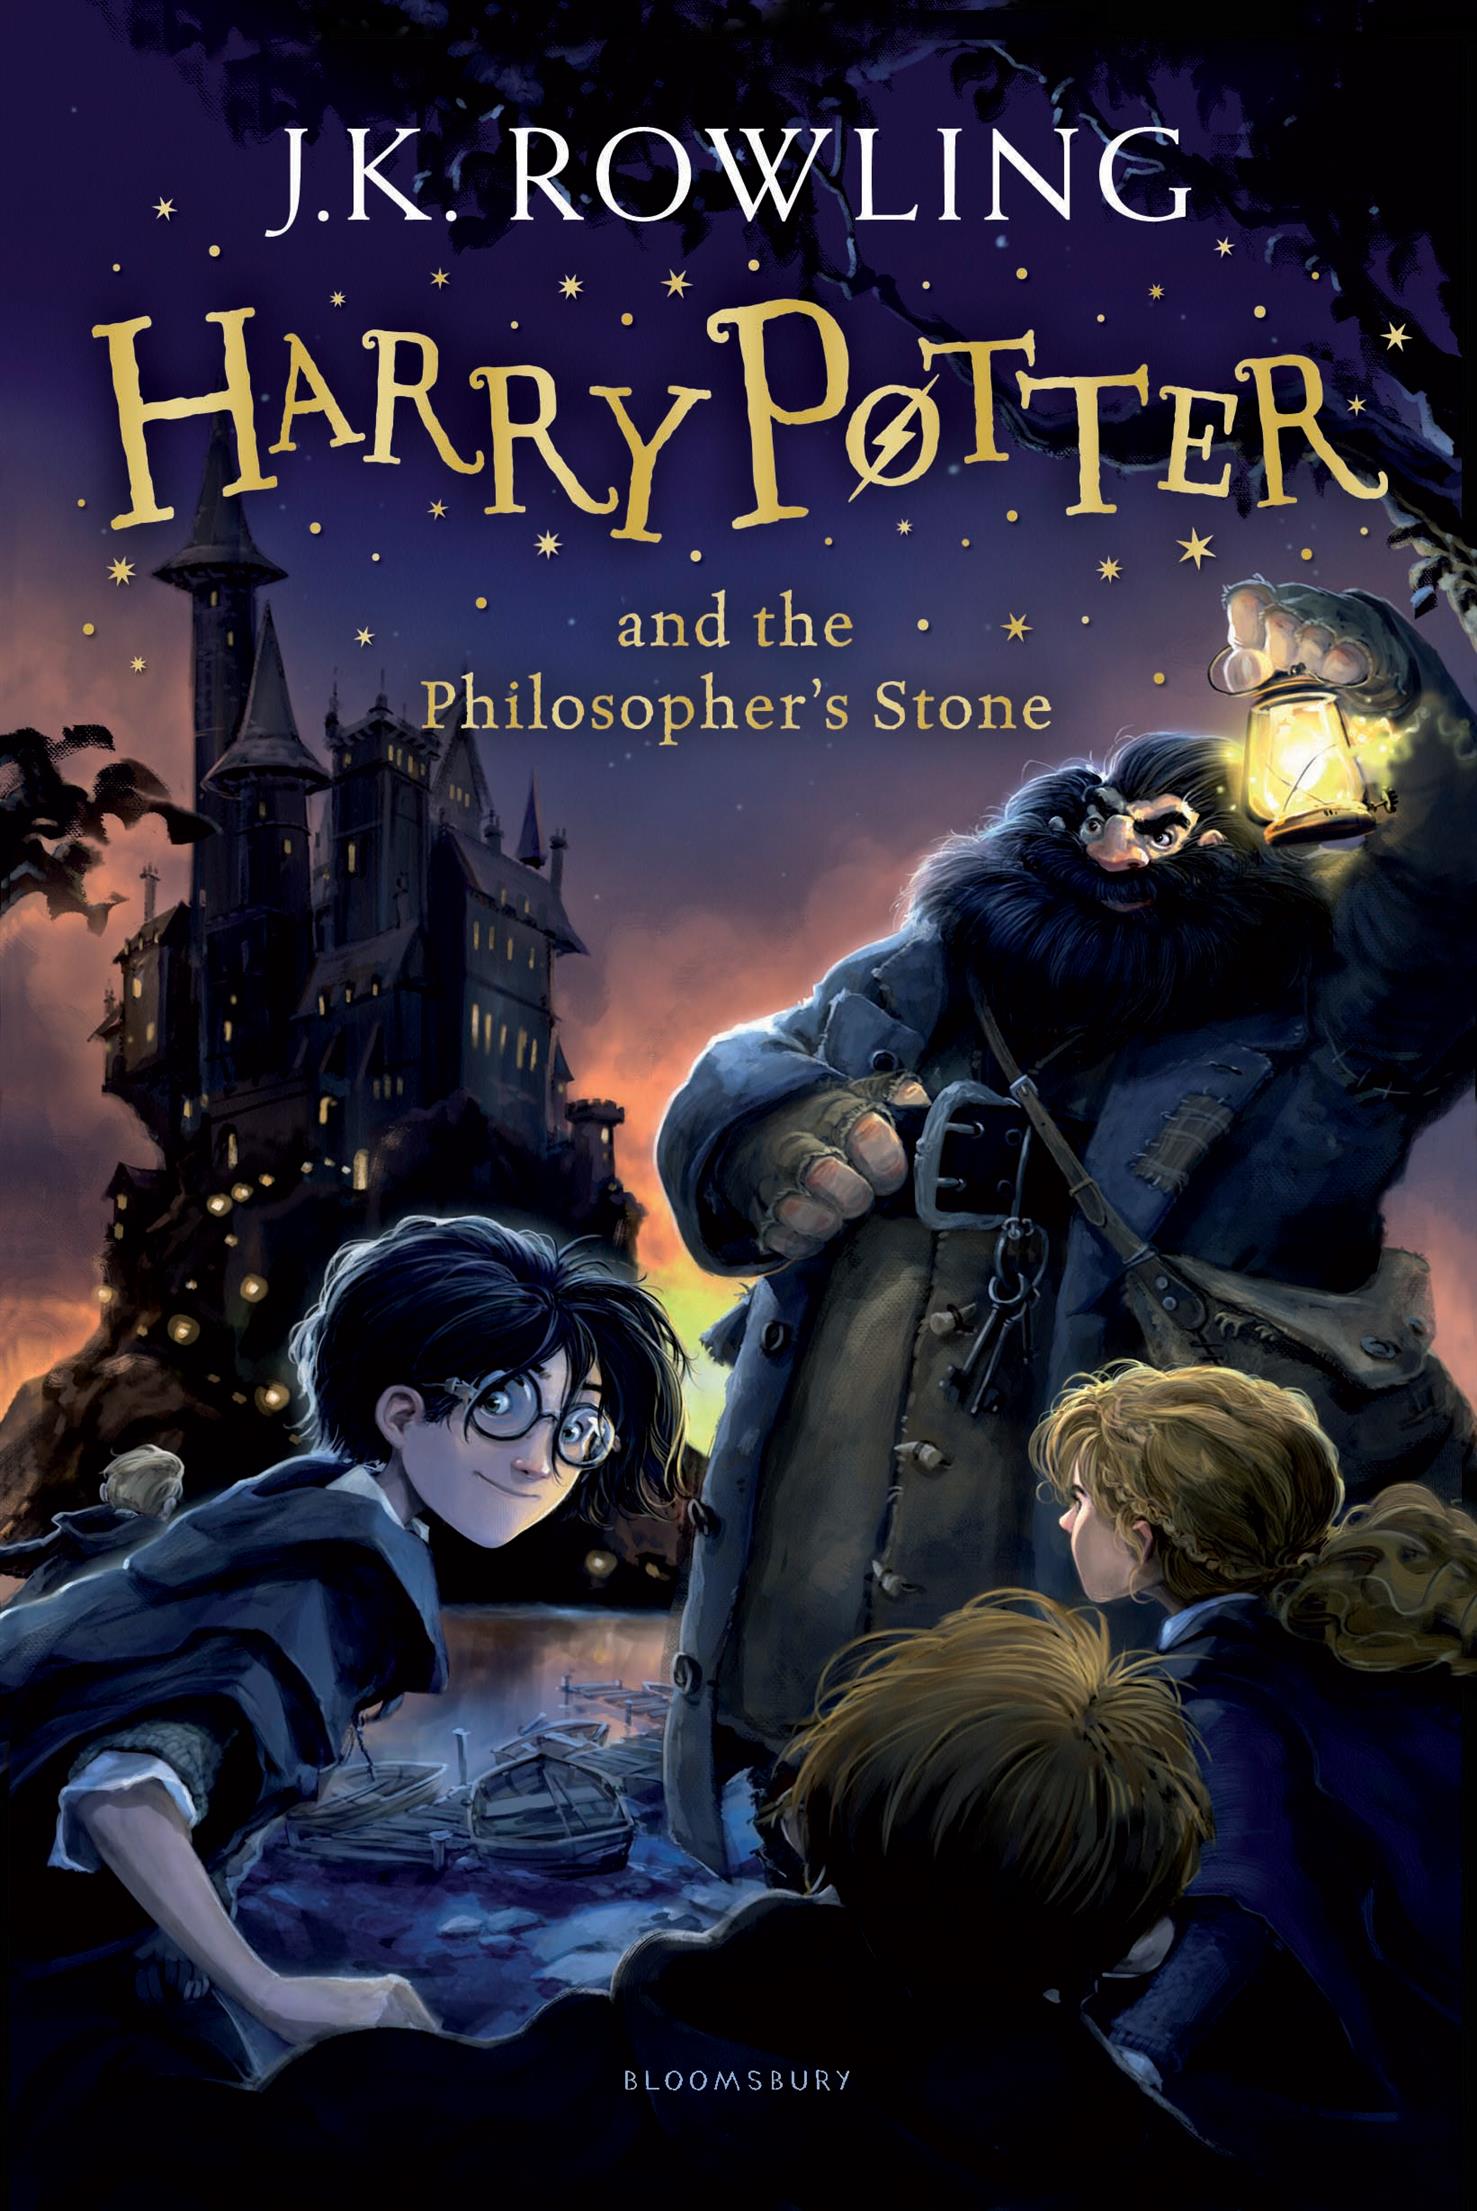 Harry Potter and the Philosopher's Stone Novel by J. K. Rowling